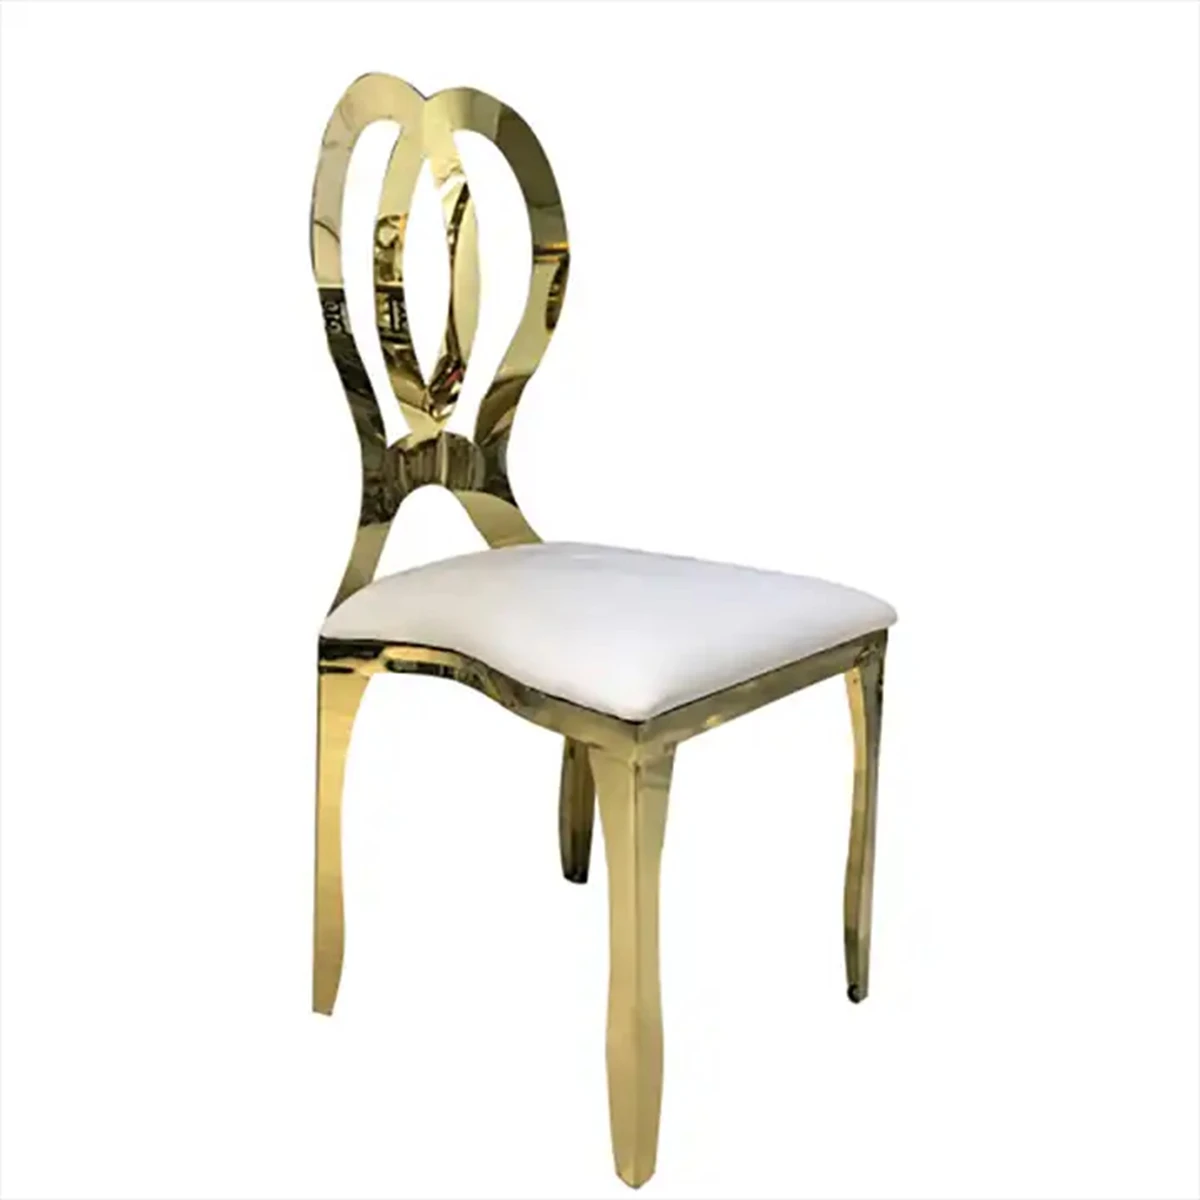 wholesale chairs for wedding reception gold stainless steel furniture event party decoration images - 6